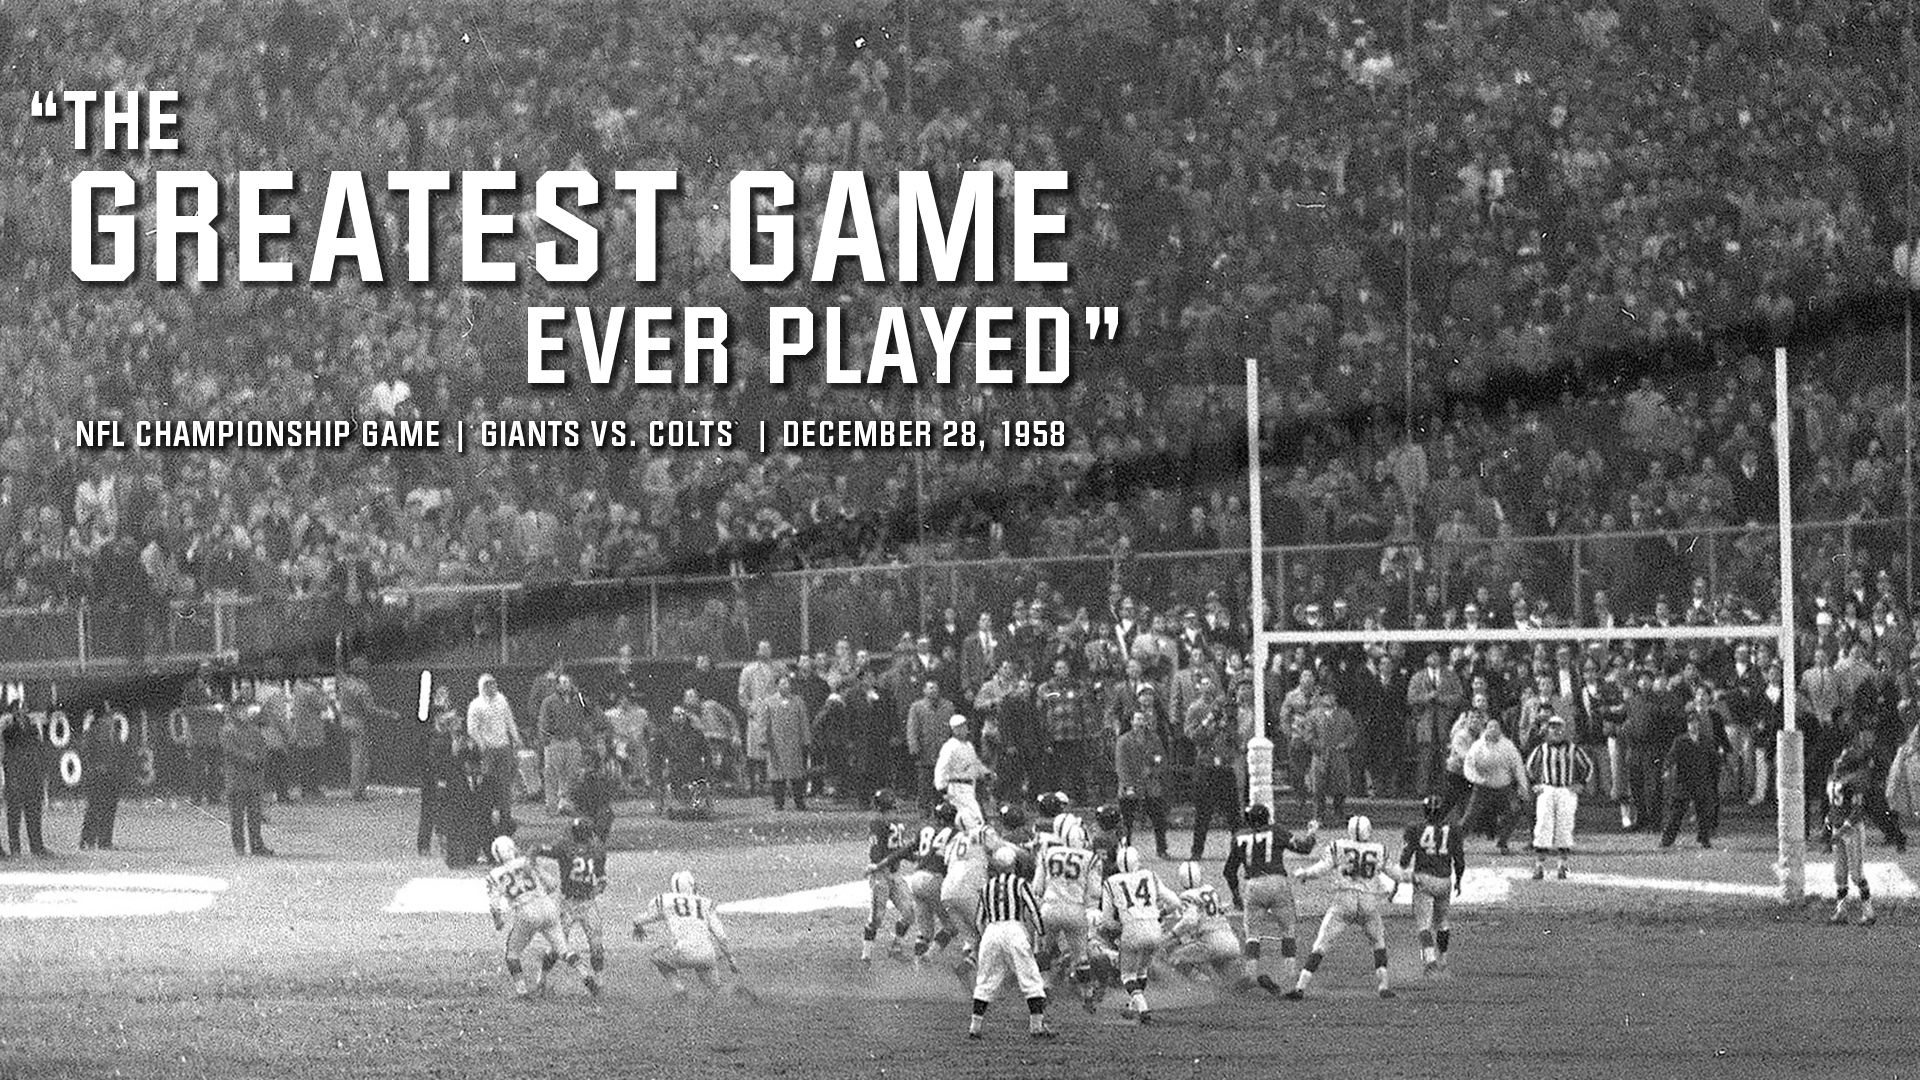 The Greatest Game Ever Played | New York Giants – Giants.com